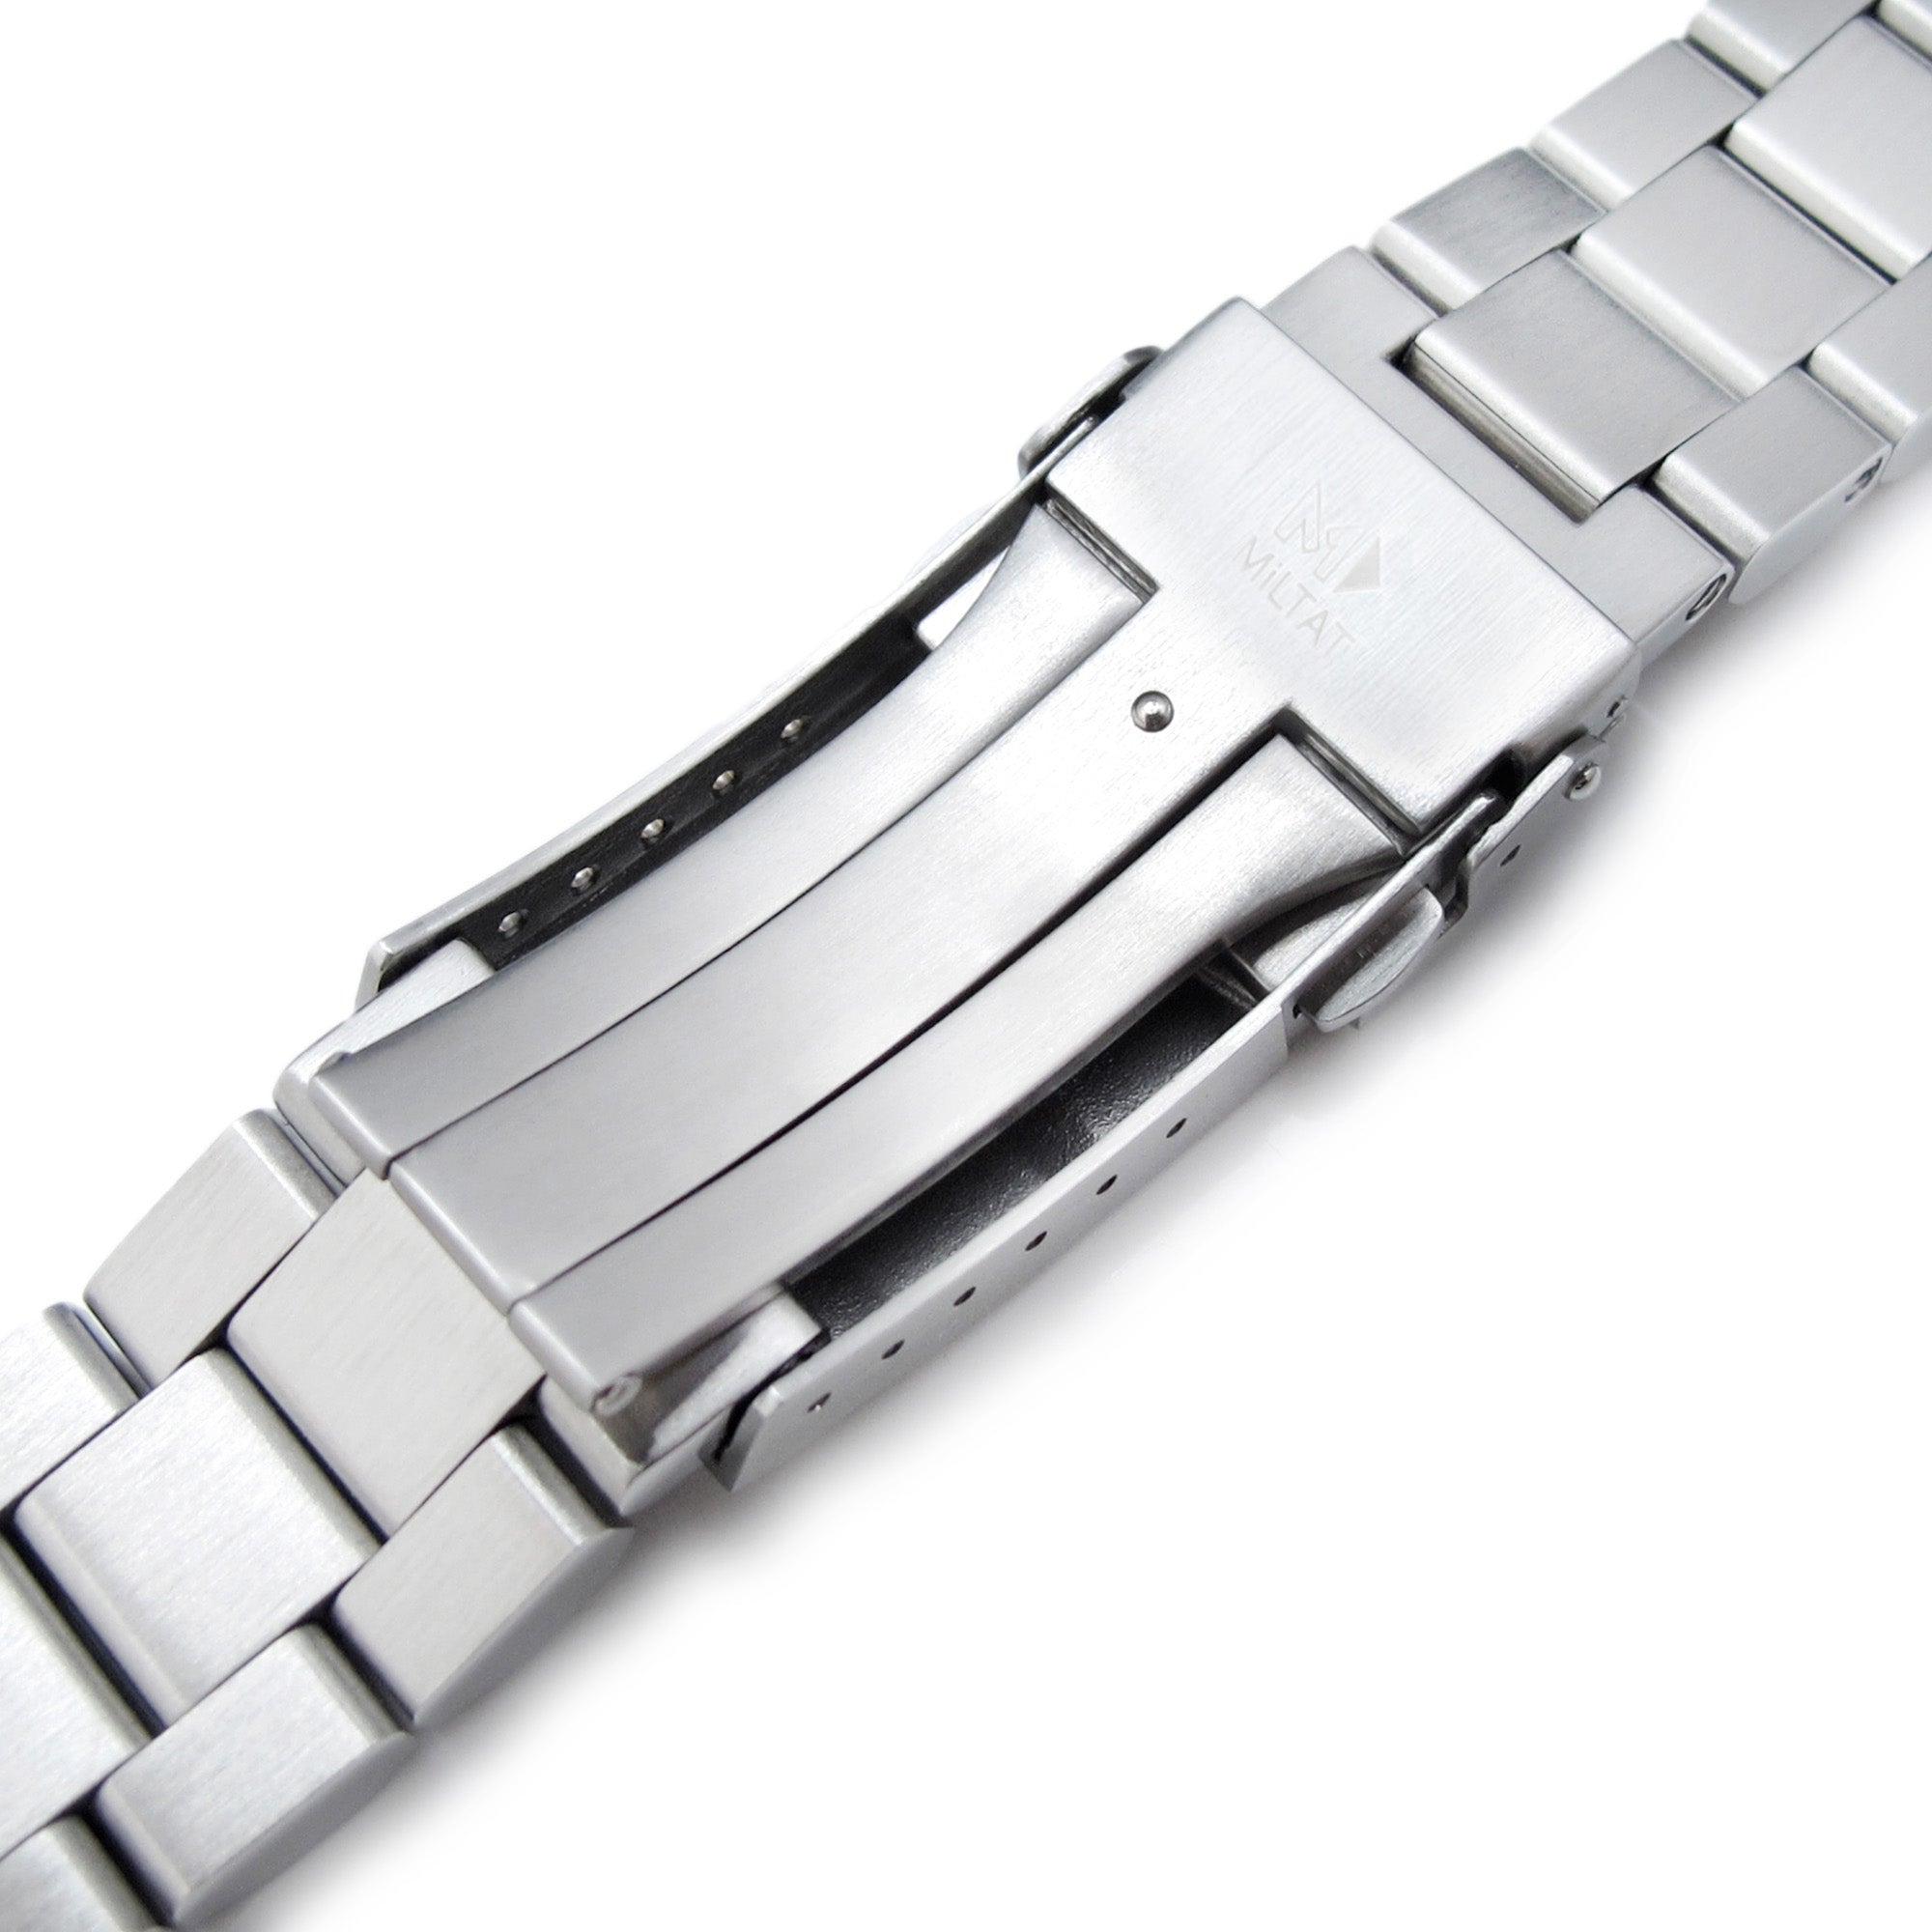 20mm Hexad Watch Band compatible with Seiko MM300 Prospex Marinemaster SBDX001, 316L Stainless Steel SUB Diver Clasp